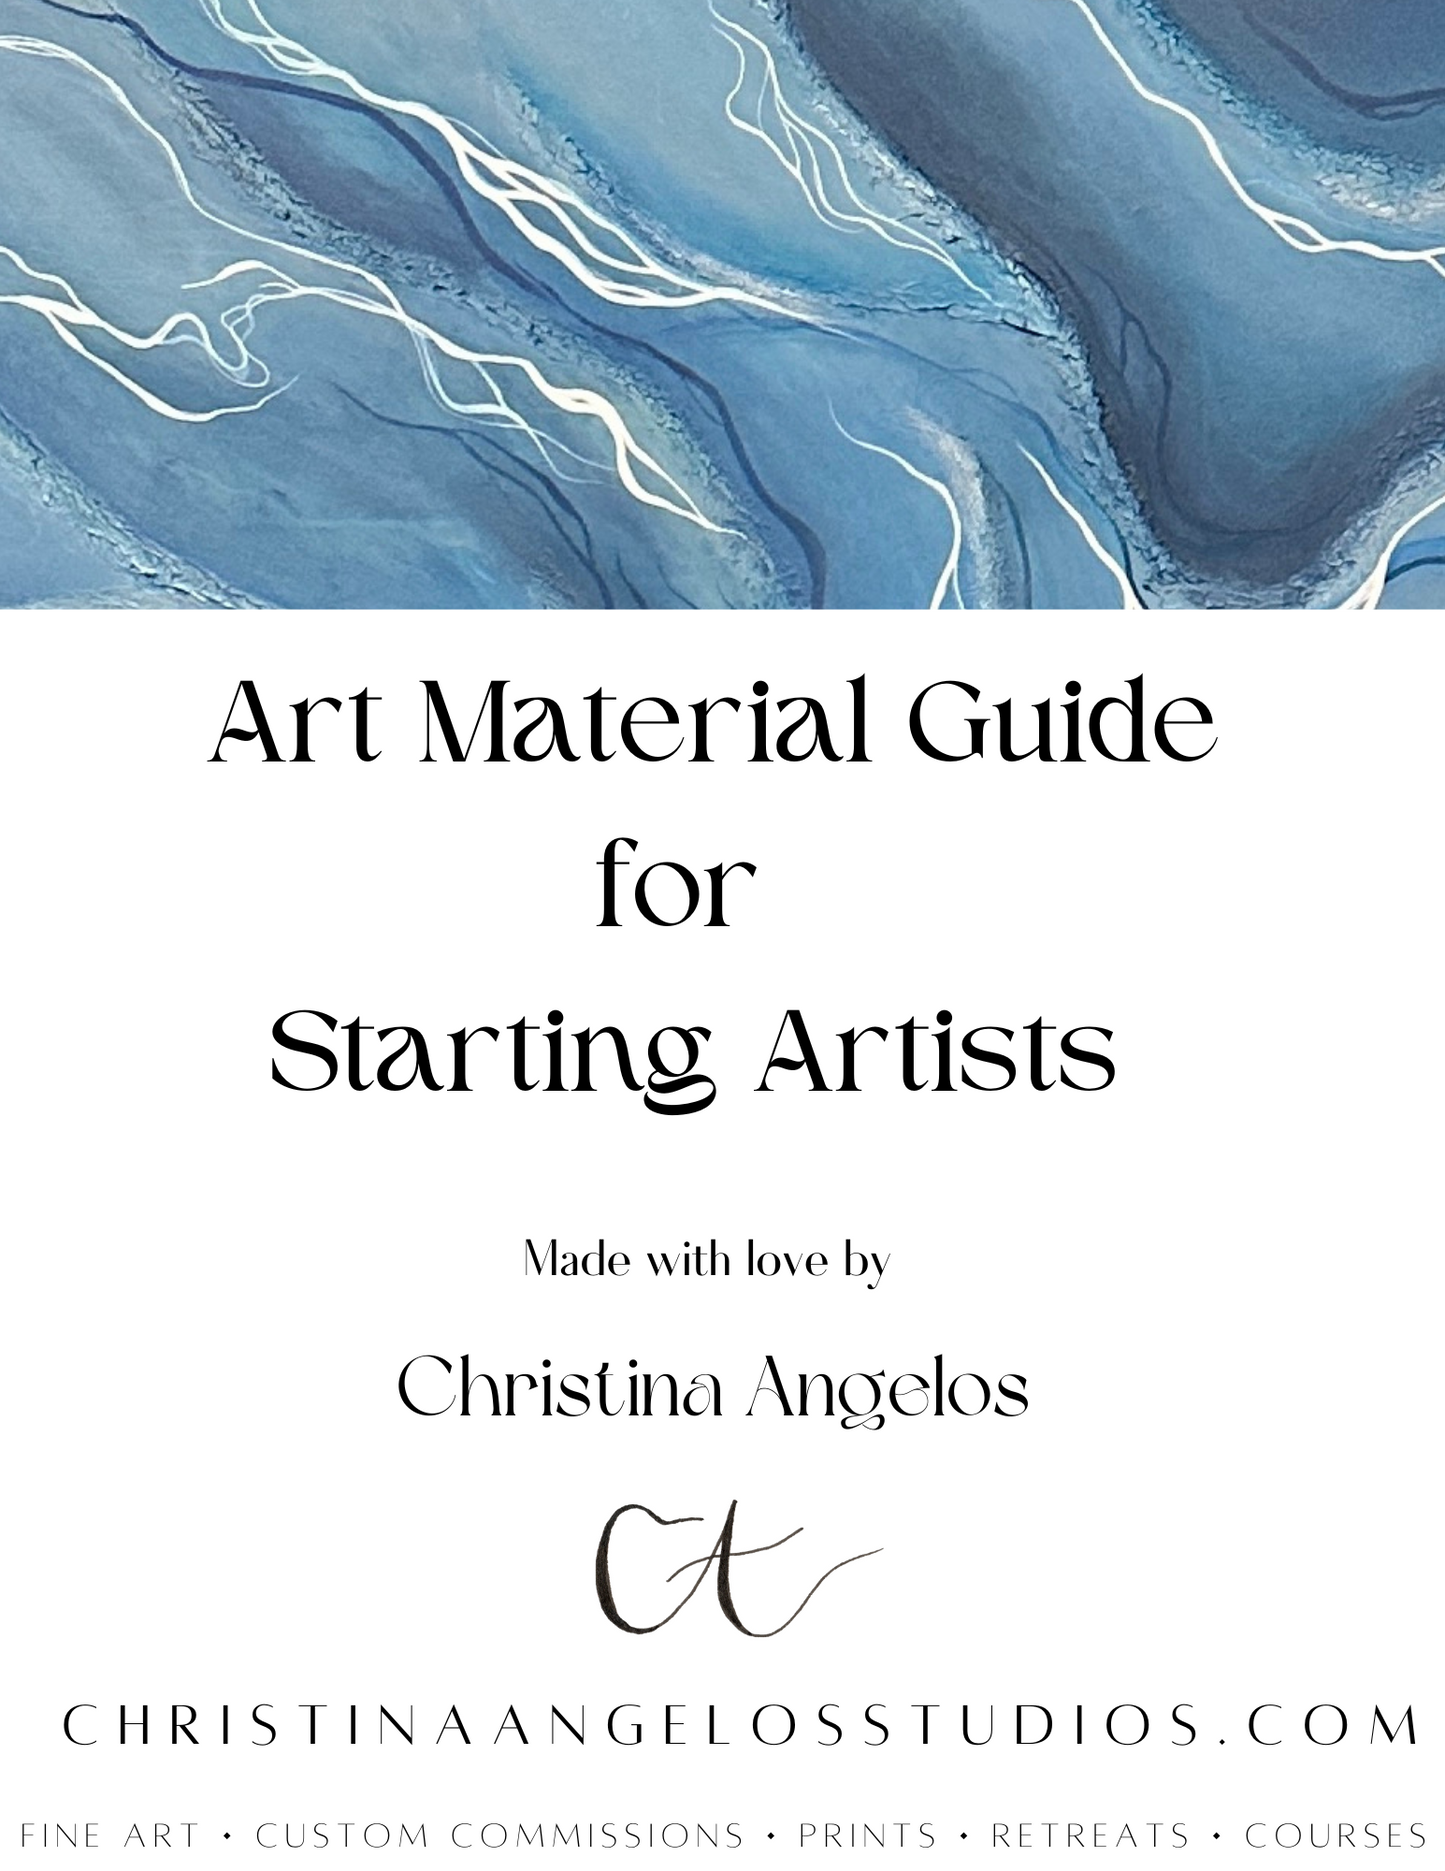 Art Material Guide for Starting Artists